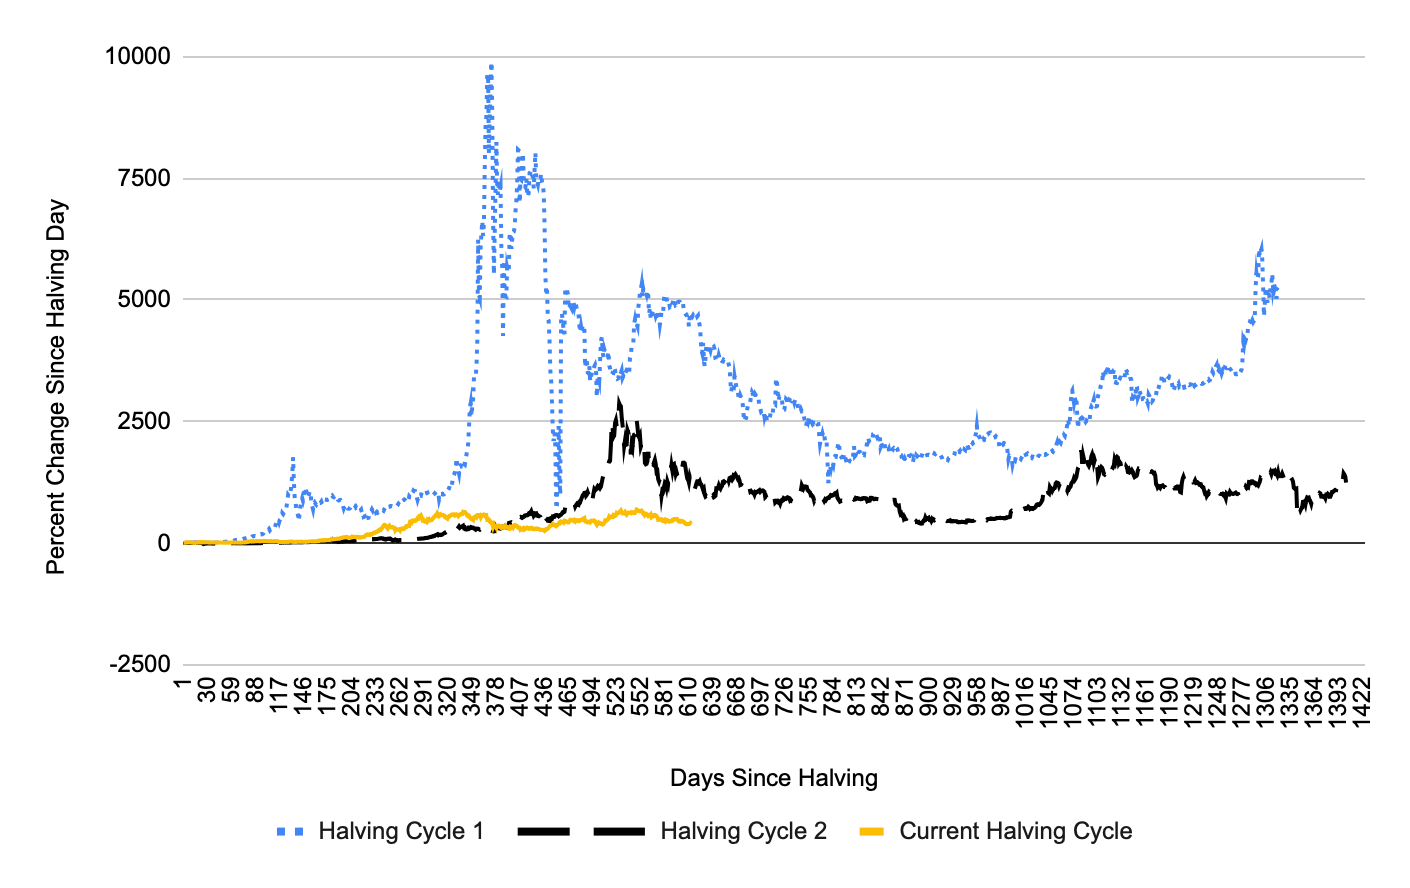 All three halving cycles: Percentage change in Bitcoin price since the halving event (Quantum Economics)